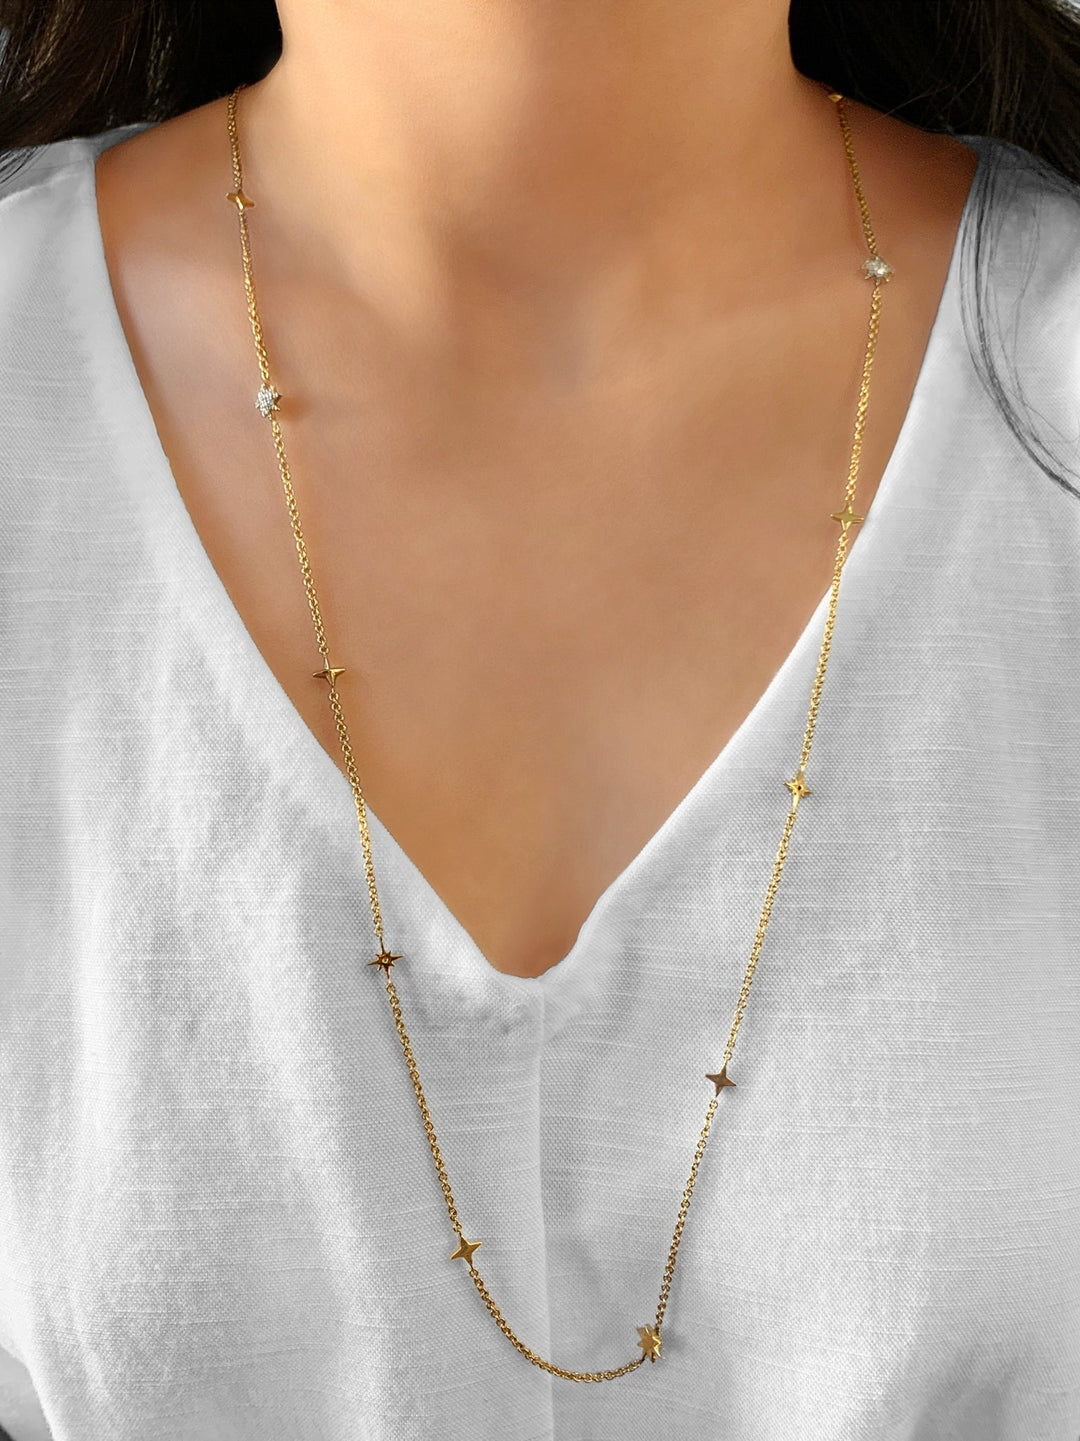 Starry Lane Layered Diamond Necklace in 14K Yellow Gold Vermeil on Sterling Silver